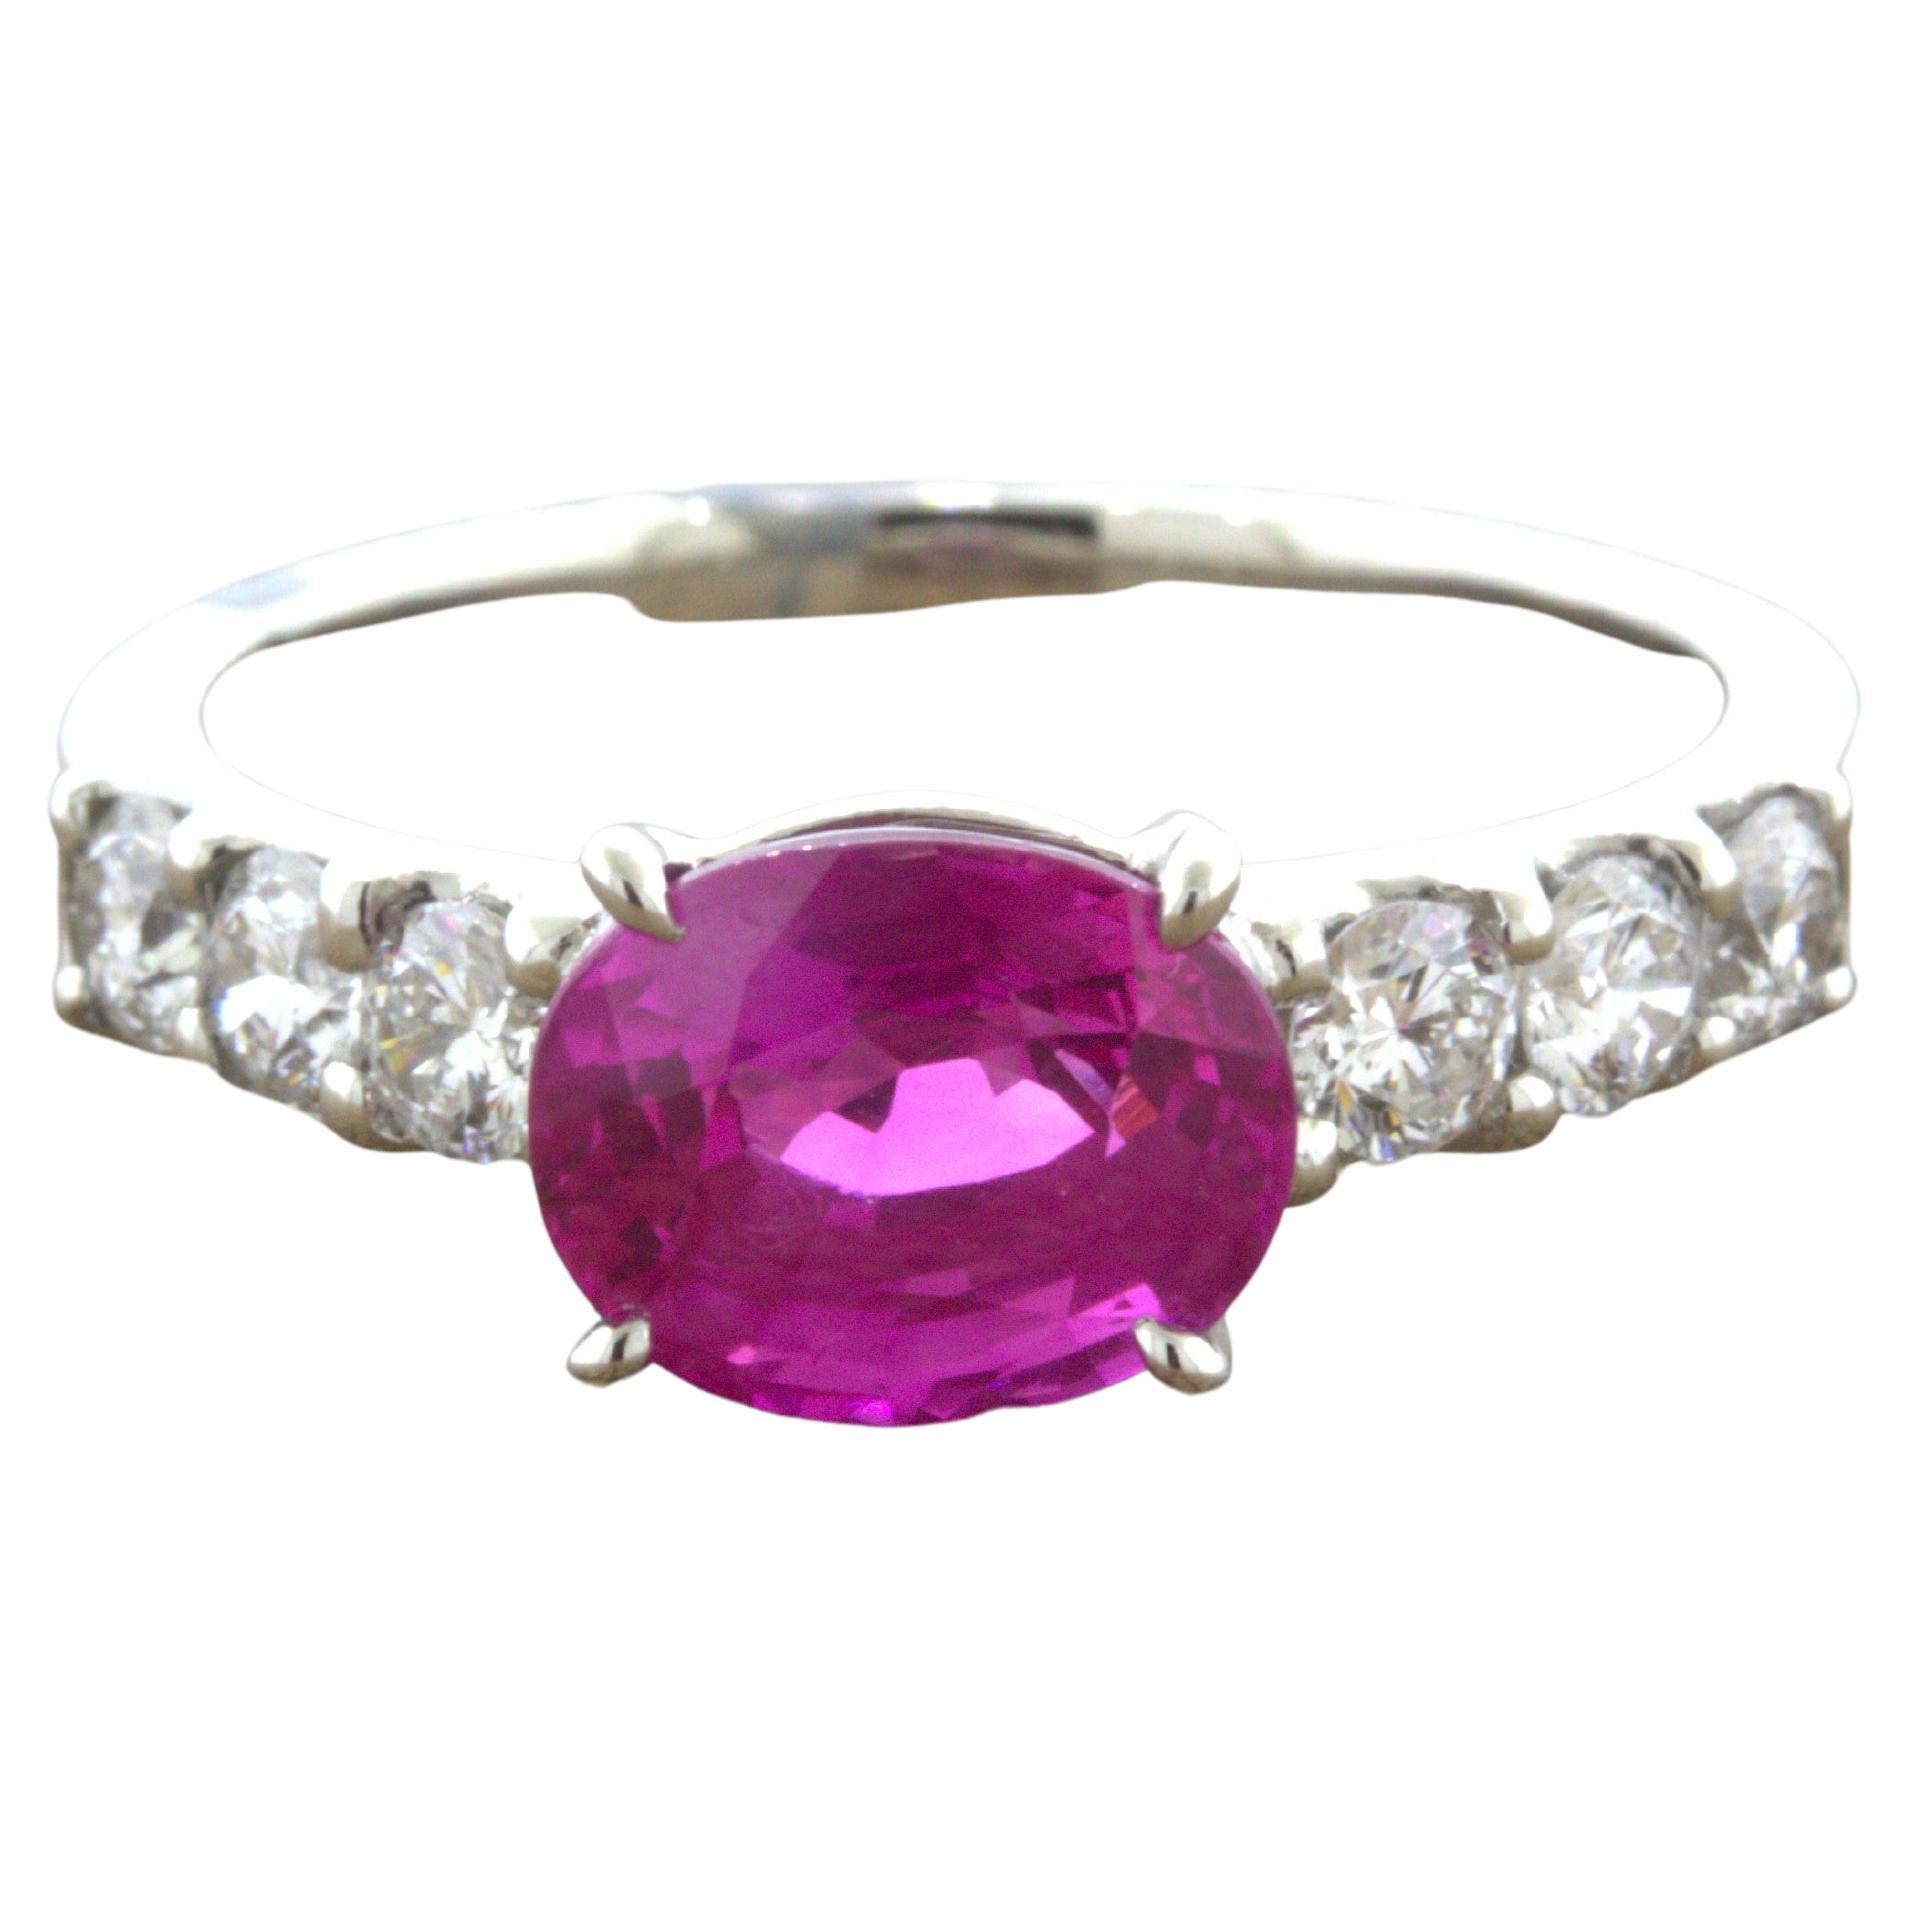 Exceptional 2.36 Carat Hot-Pink Sapphire Diamond Platinum Ring, GIA Certified For Sale